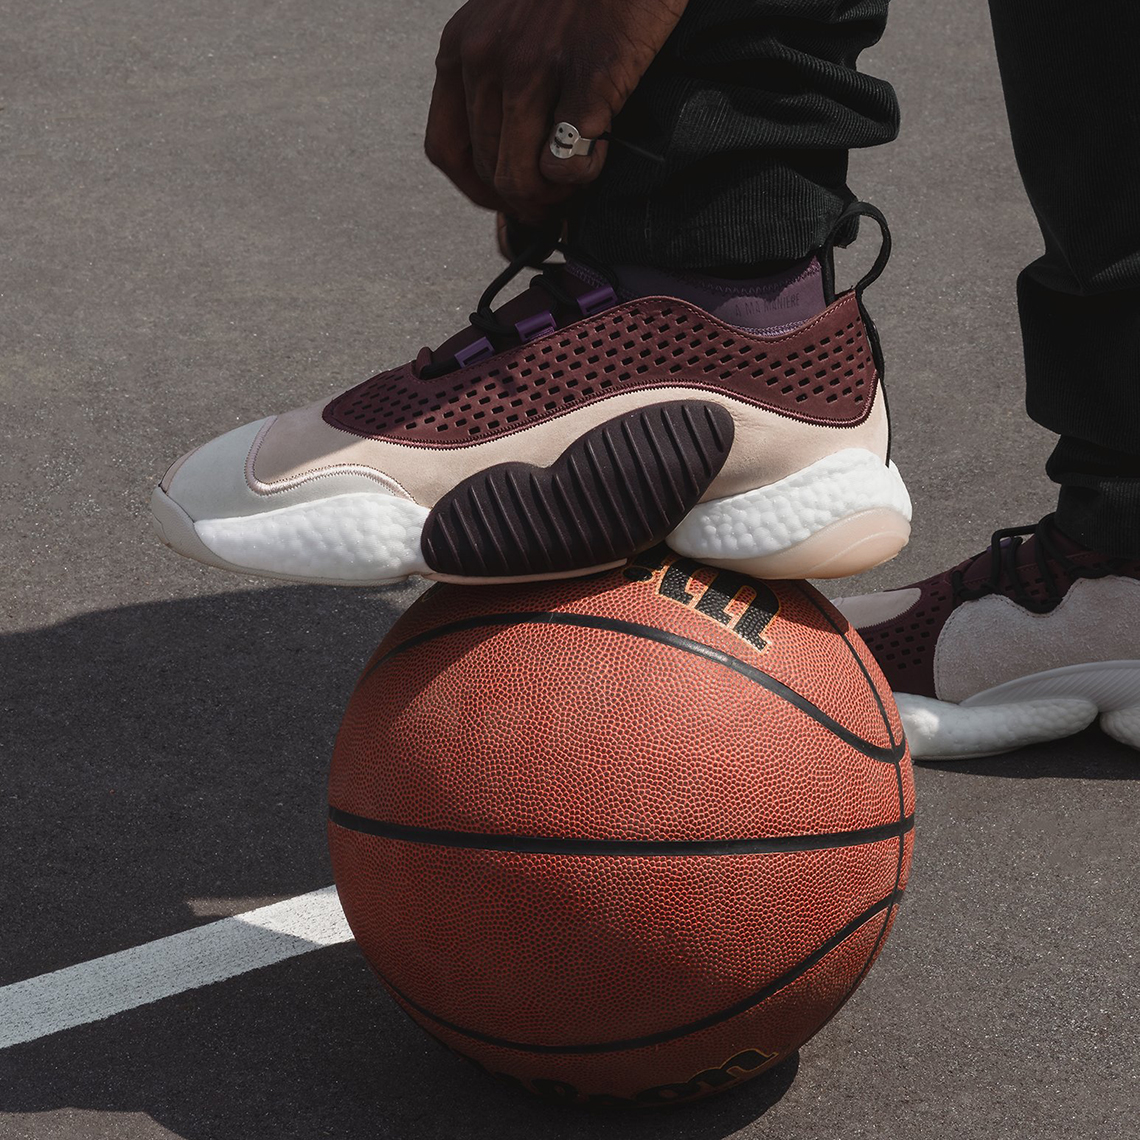 Adidas & A Ma Maniere Team Up For Luxe Crazy BYW Low